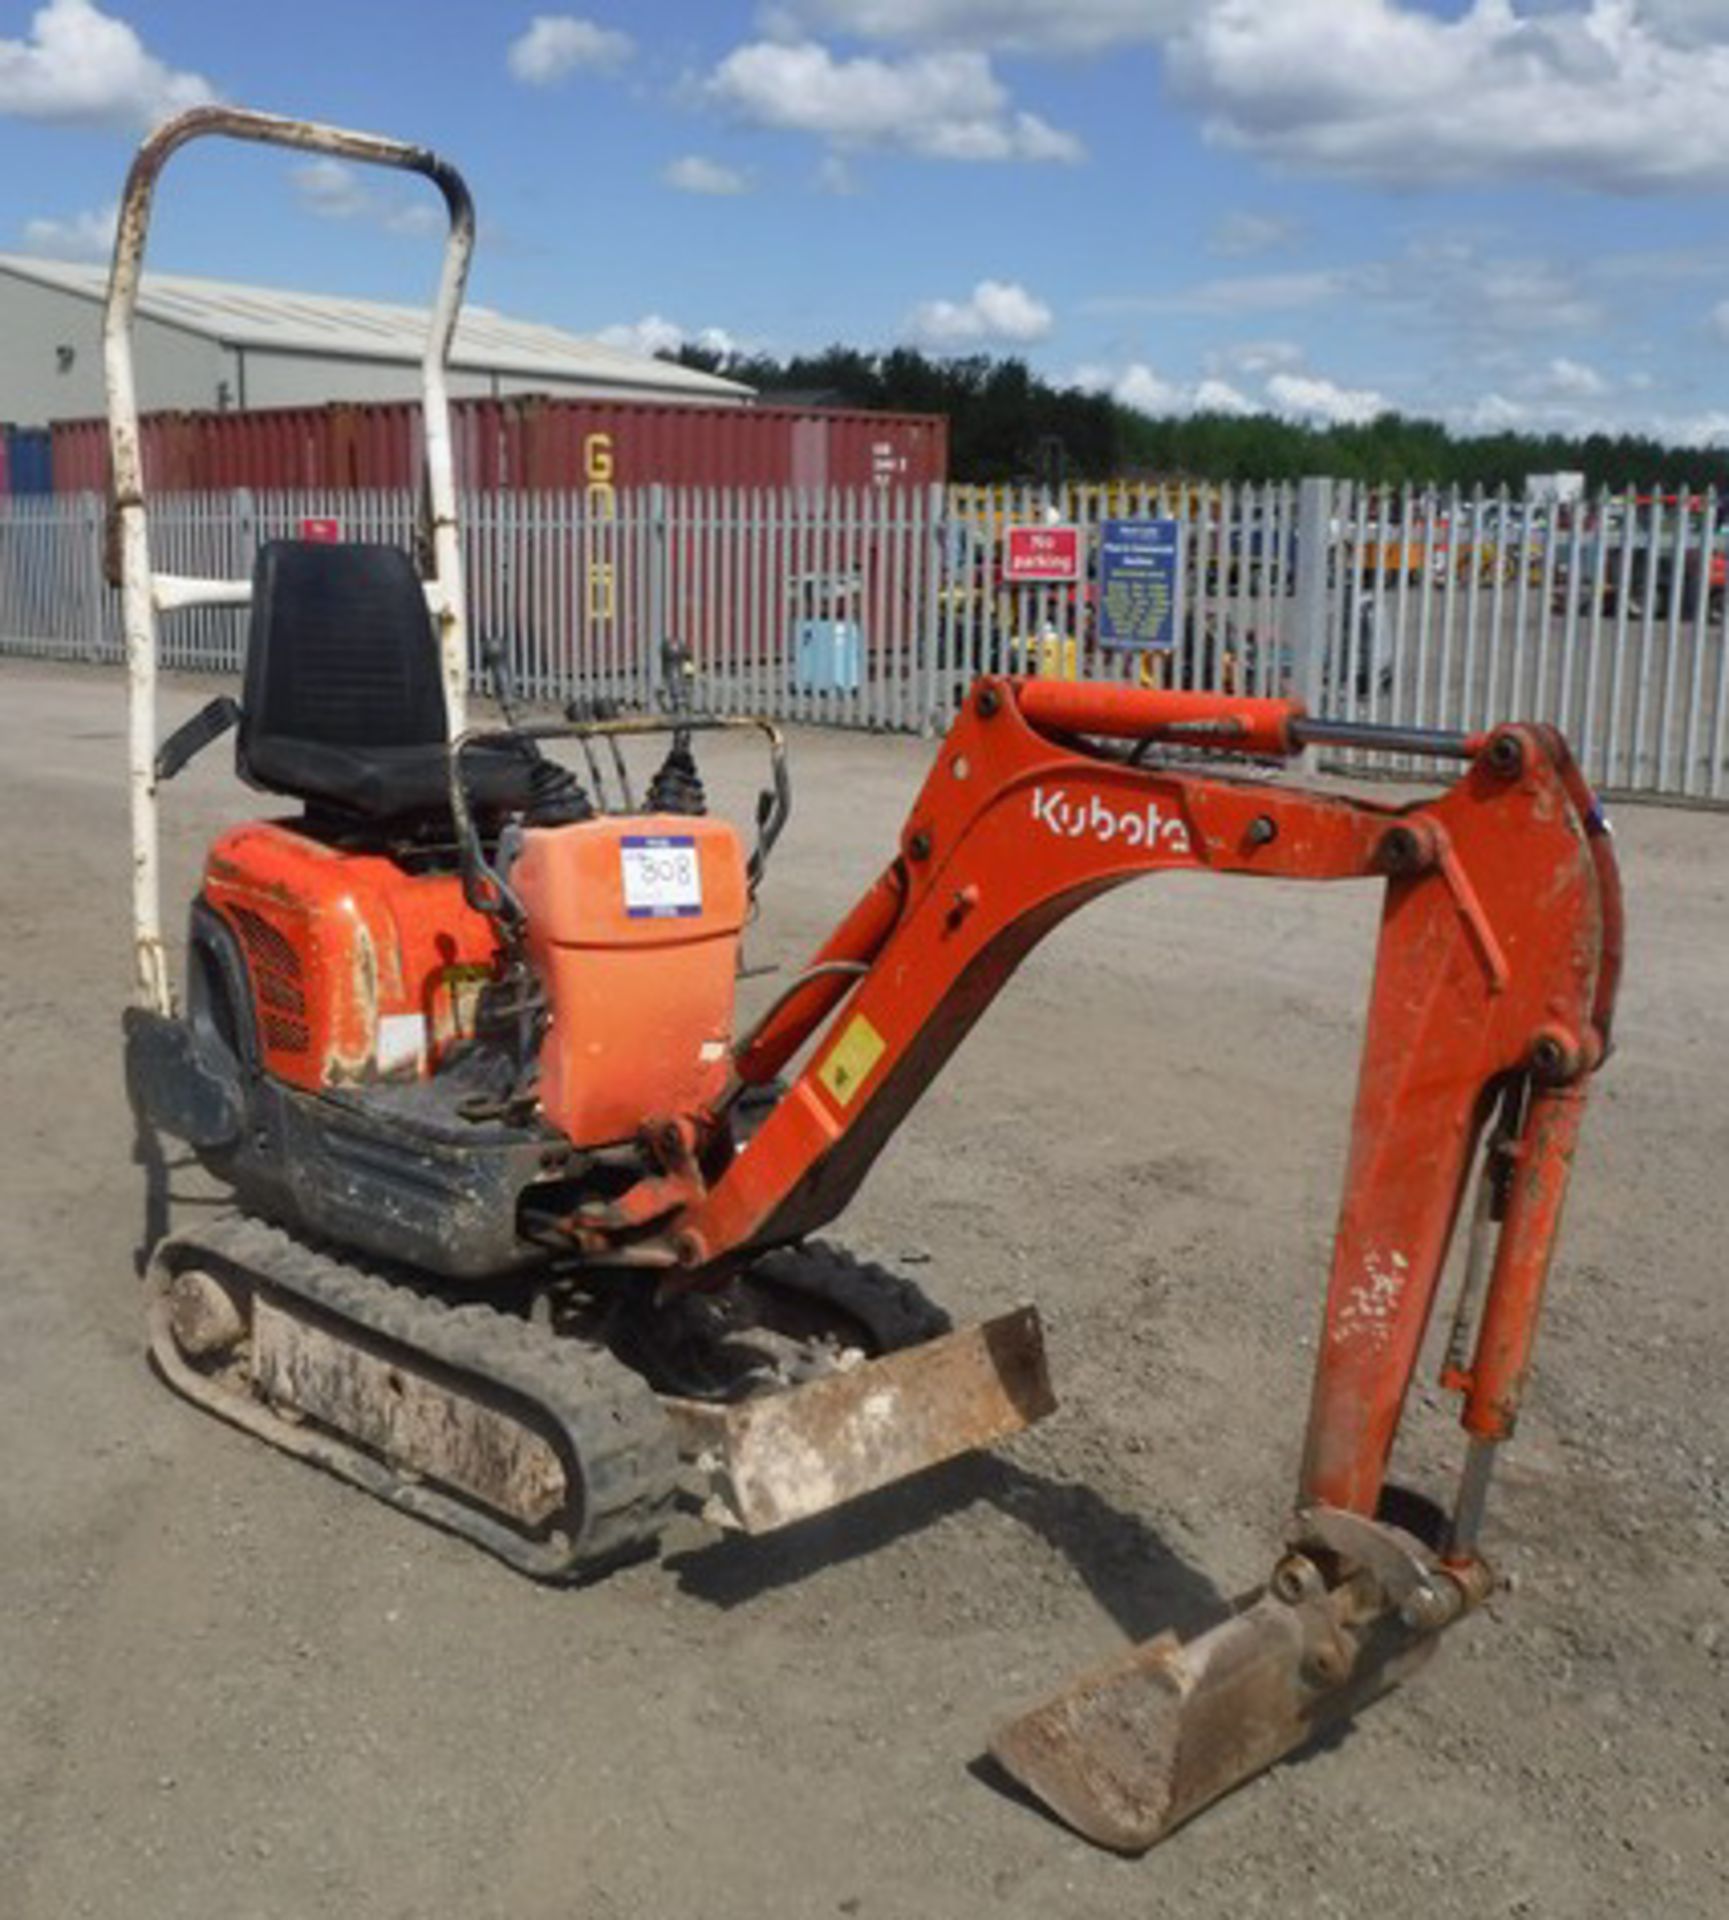 KUBOTA K008-3 ULTRA COMPACT EXCAVATOR C/W WITH BUCKET. SN12613. 3154 HRS. YEAR UNKNOWN - Image 3 of 18